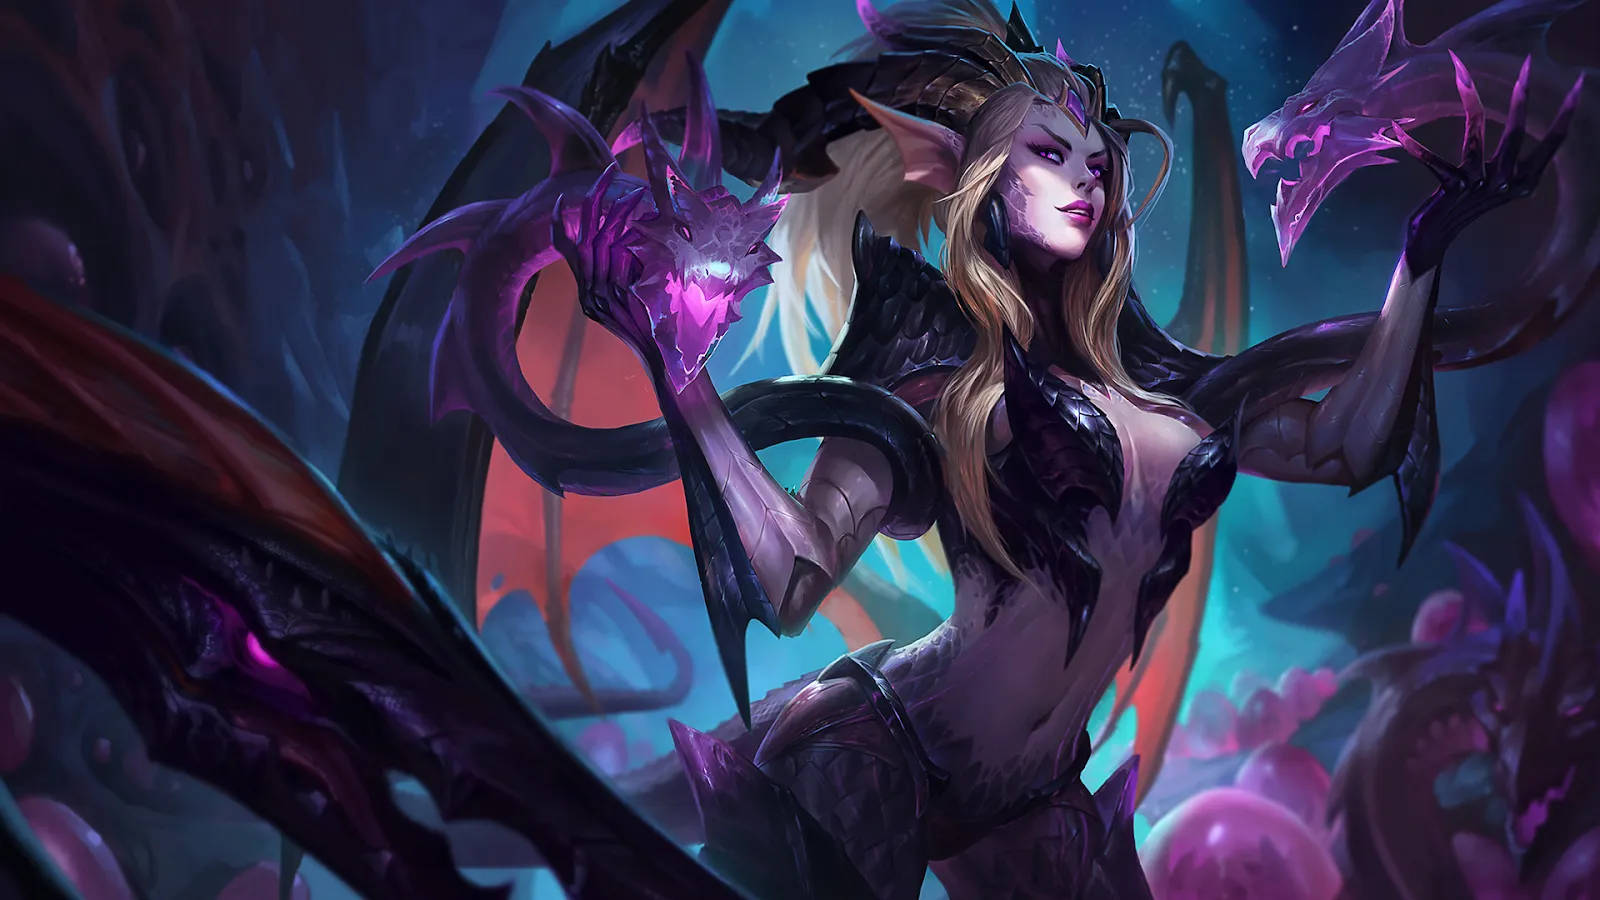 Dragon Sorceress Zyra in League of Legends